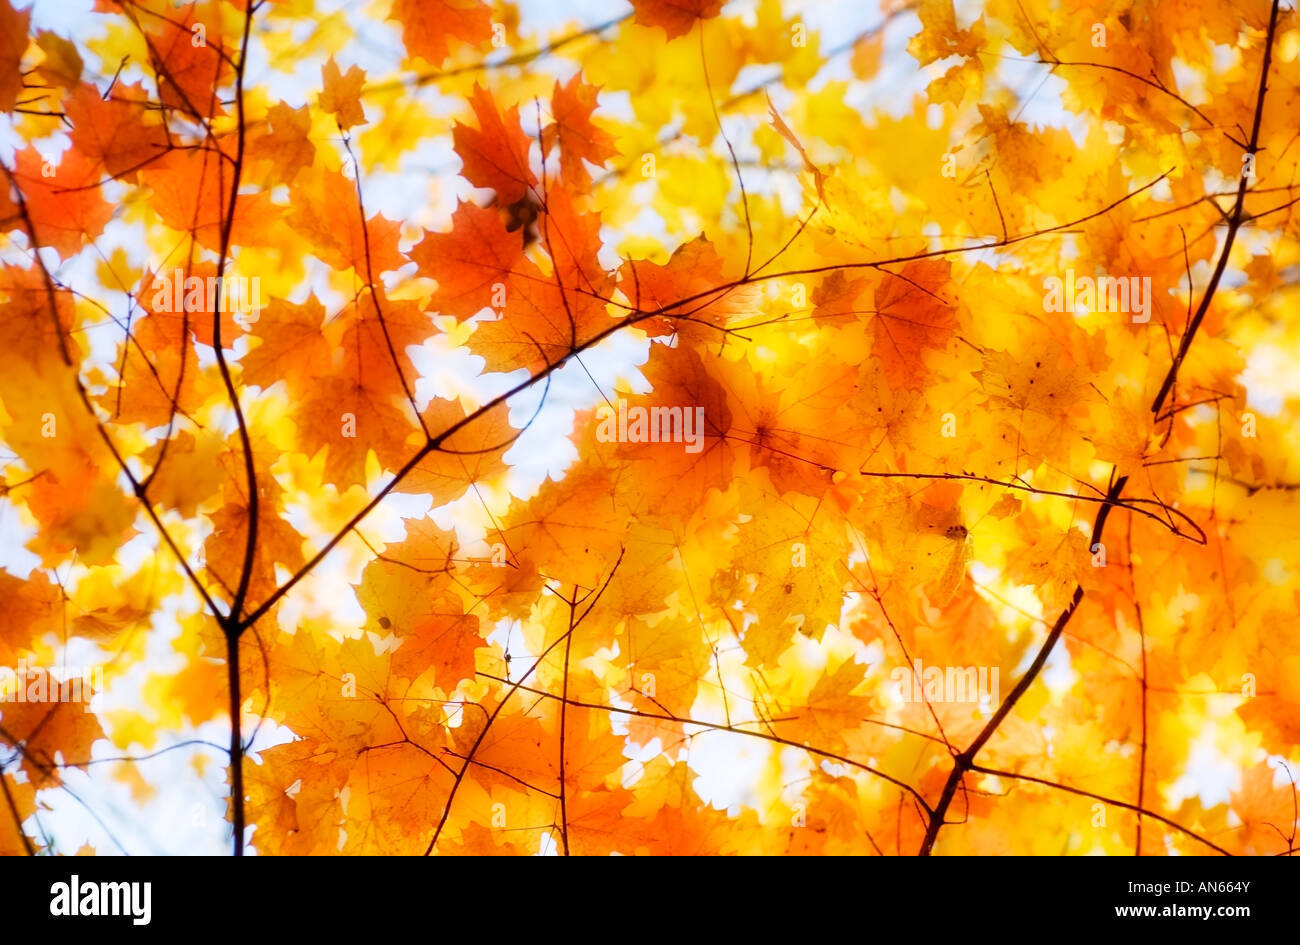 Fall leaves on branches Stock Photo